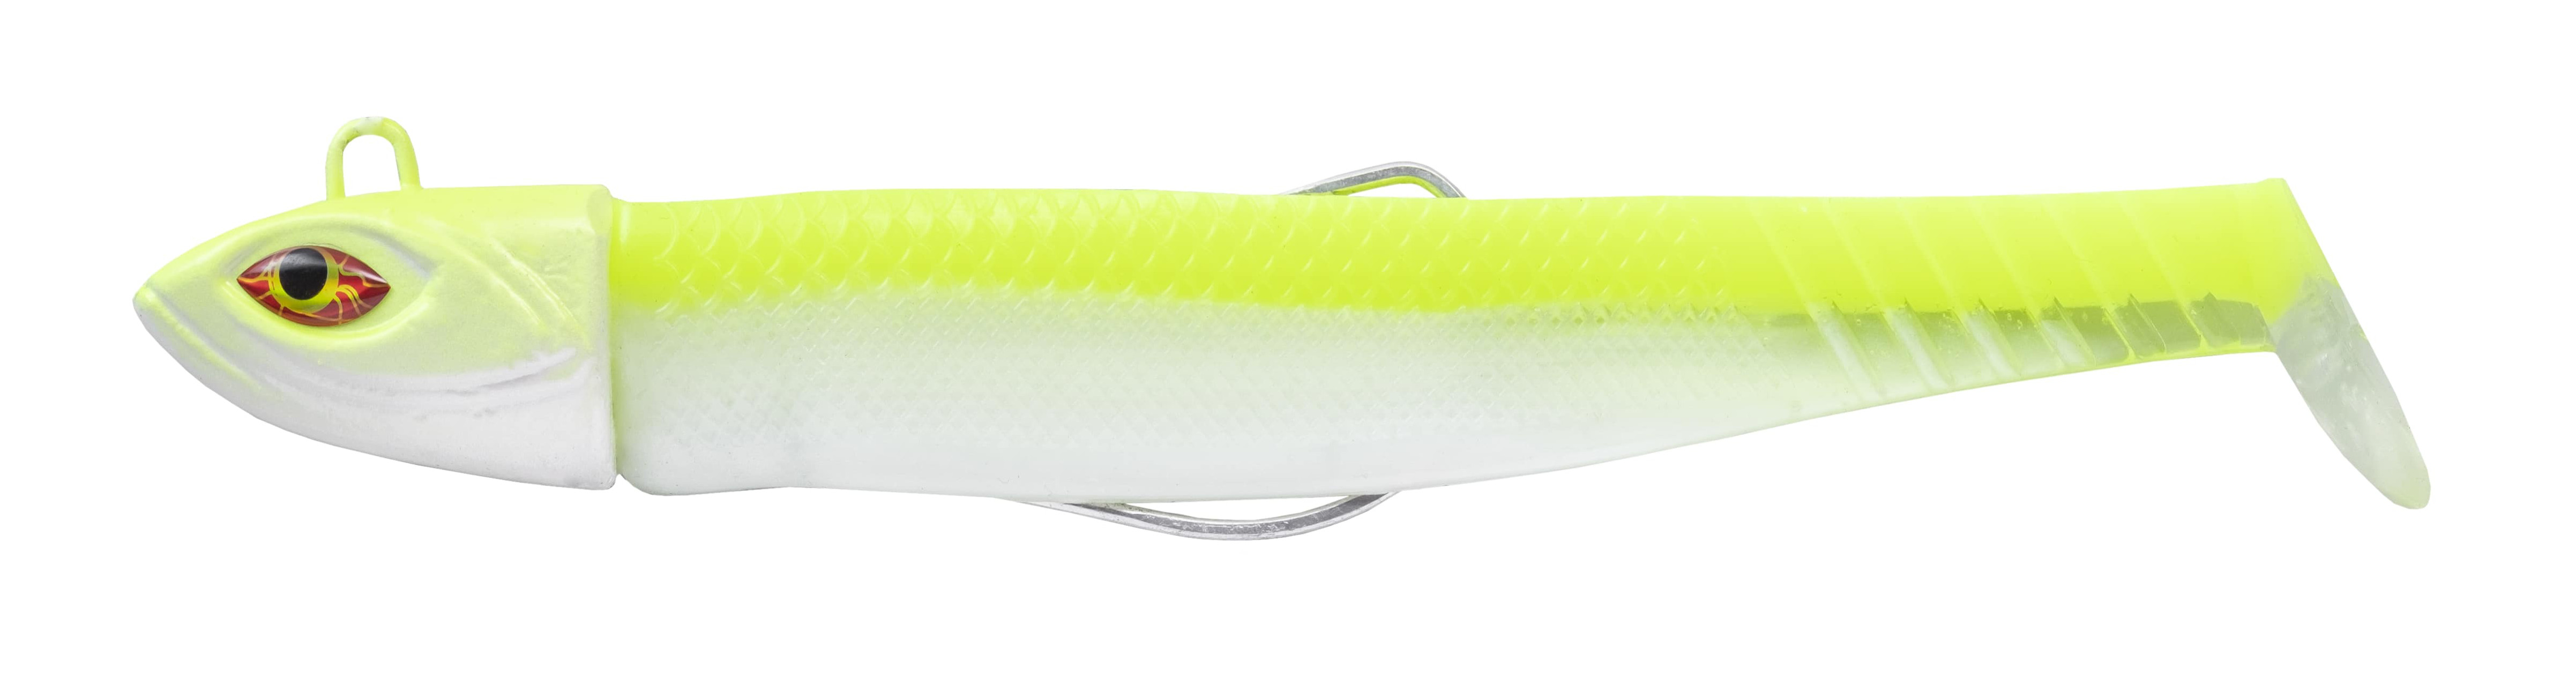 Cinnetic Crafty Candy Shad 17cm (125g) (2 pcs) - White Chartreuse